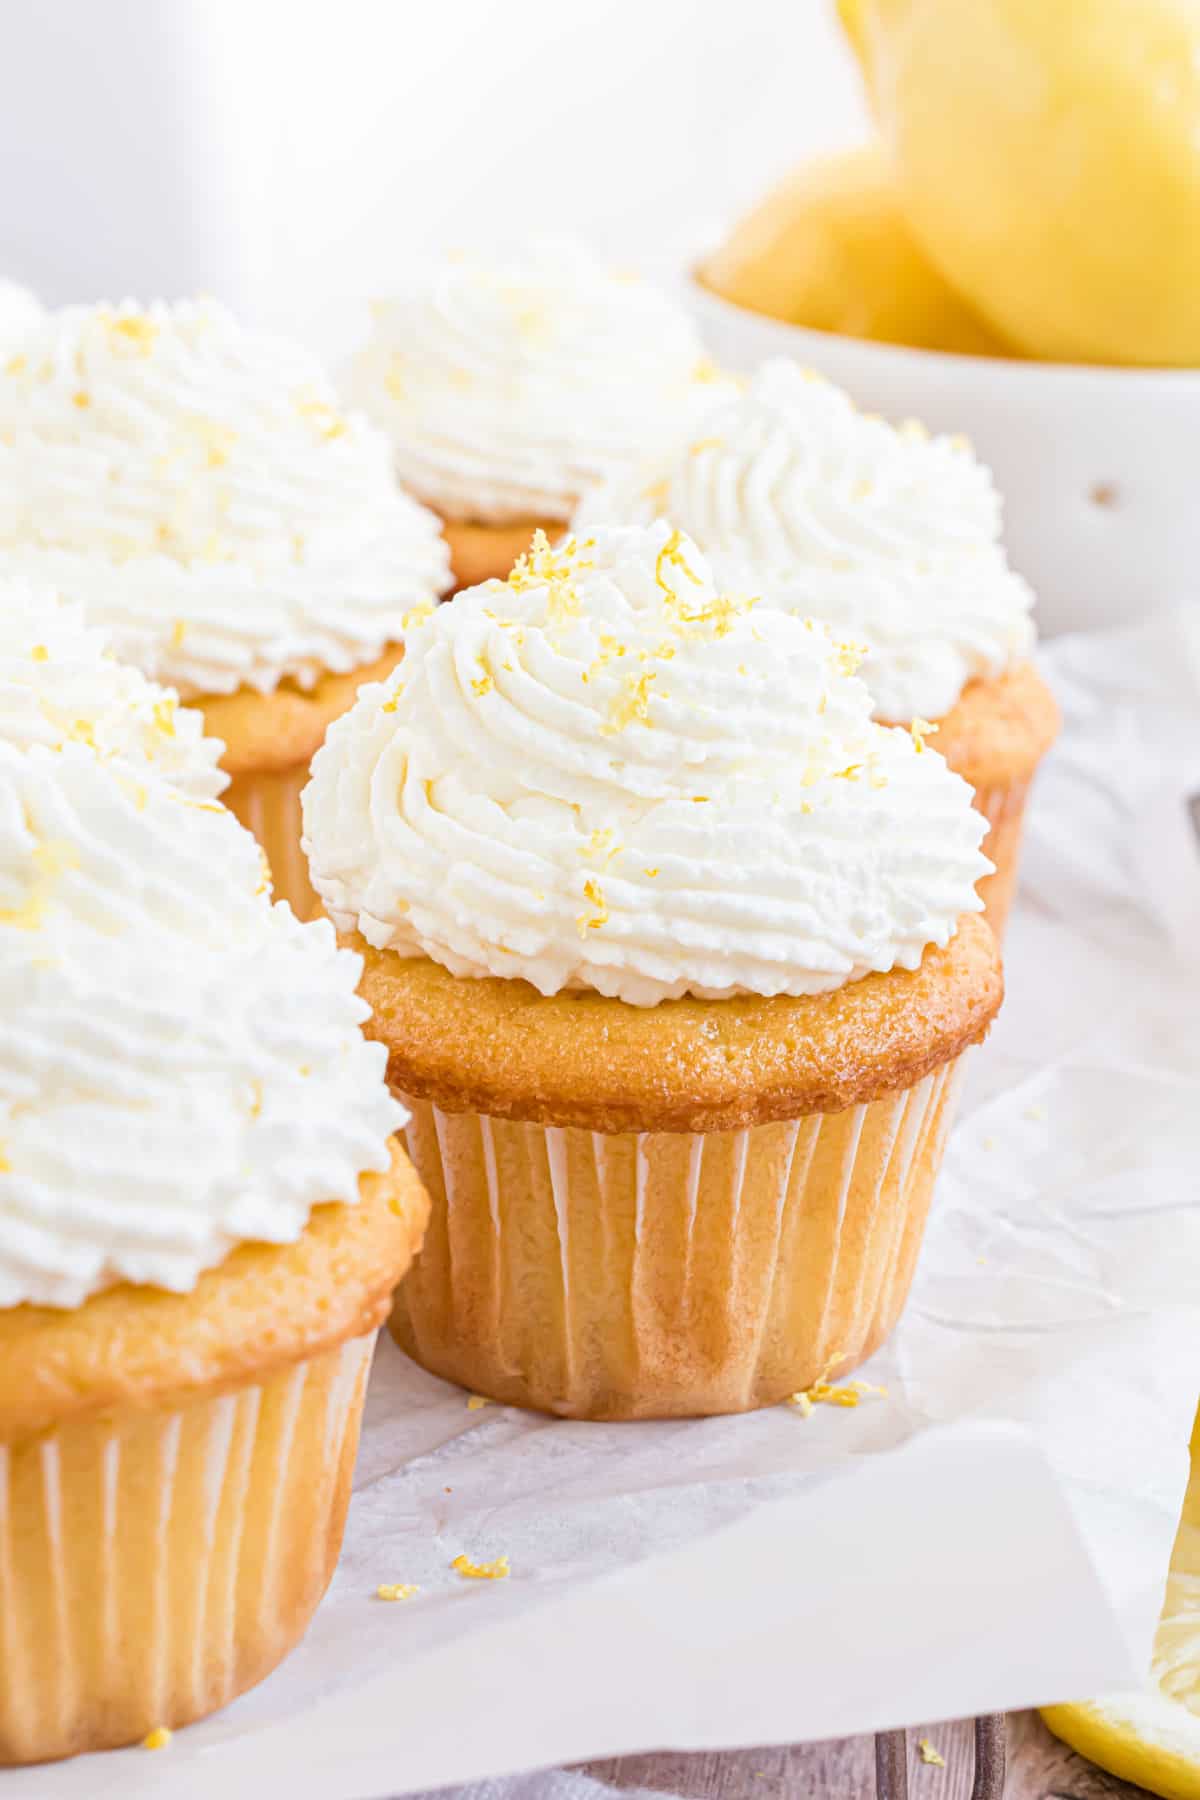 Cupcakes with lemon whipped cream on top on a white plate with parchment paper.